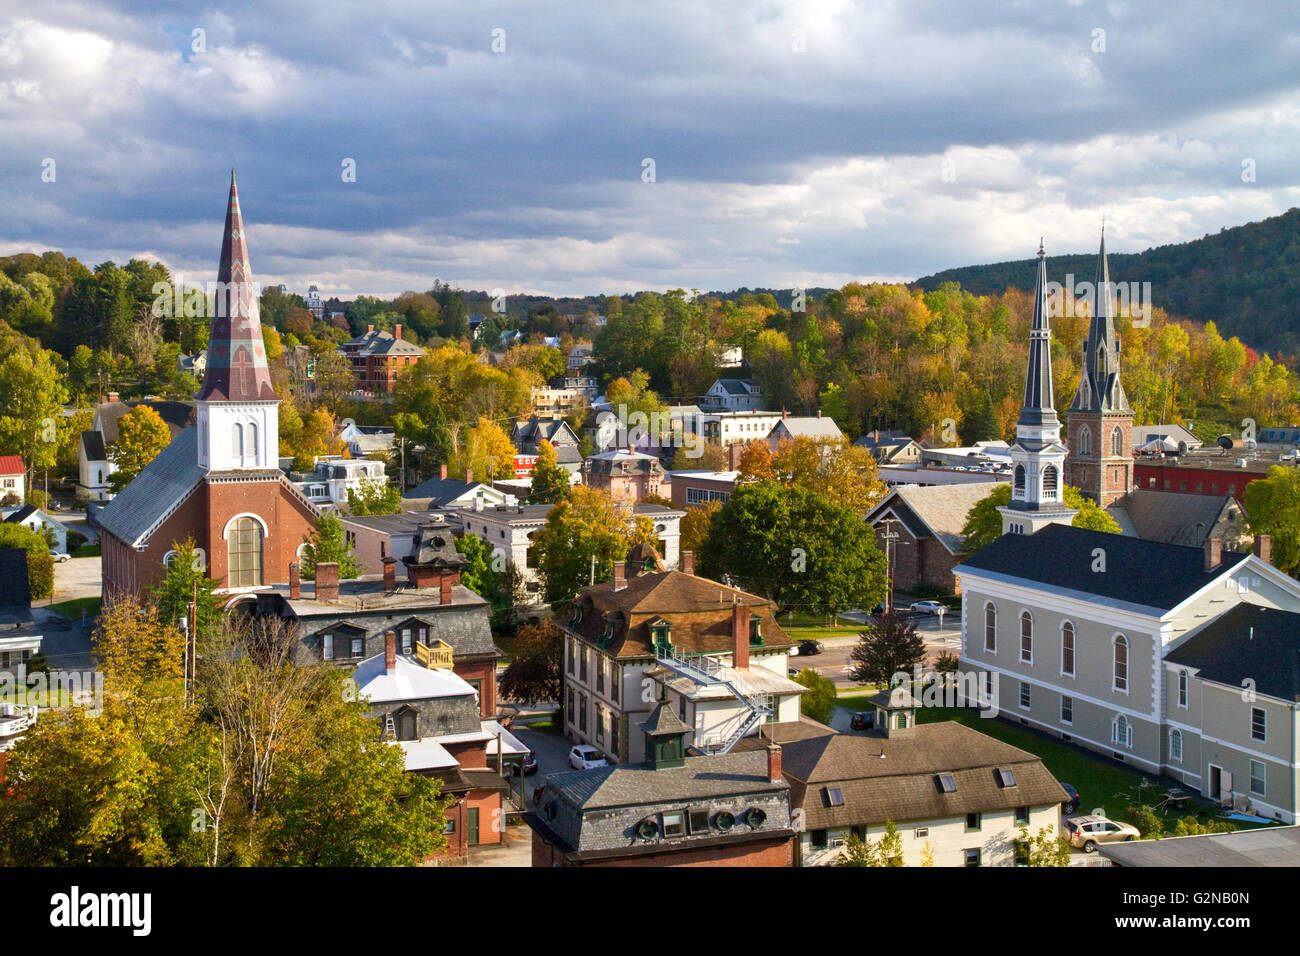 The town of Montpelier, Vermont, USA. Stock Photo